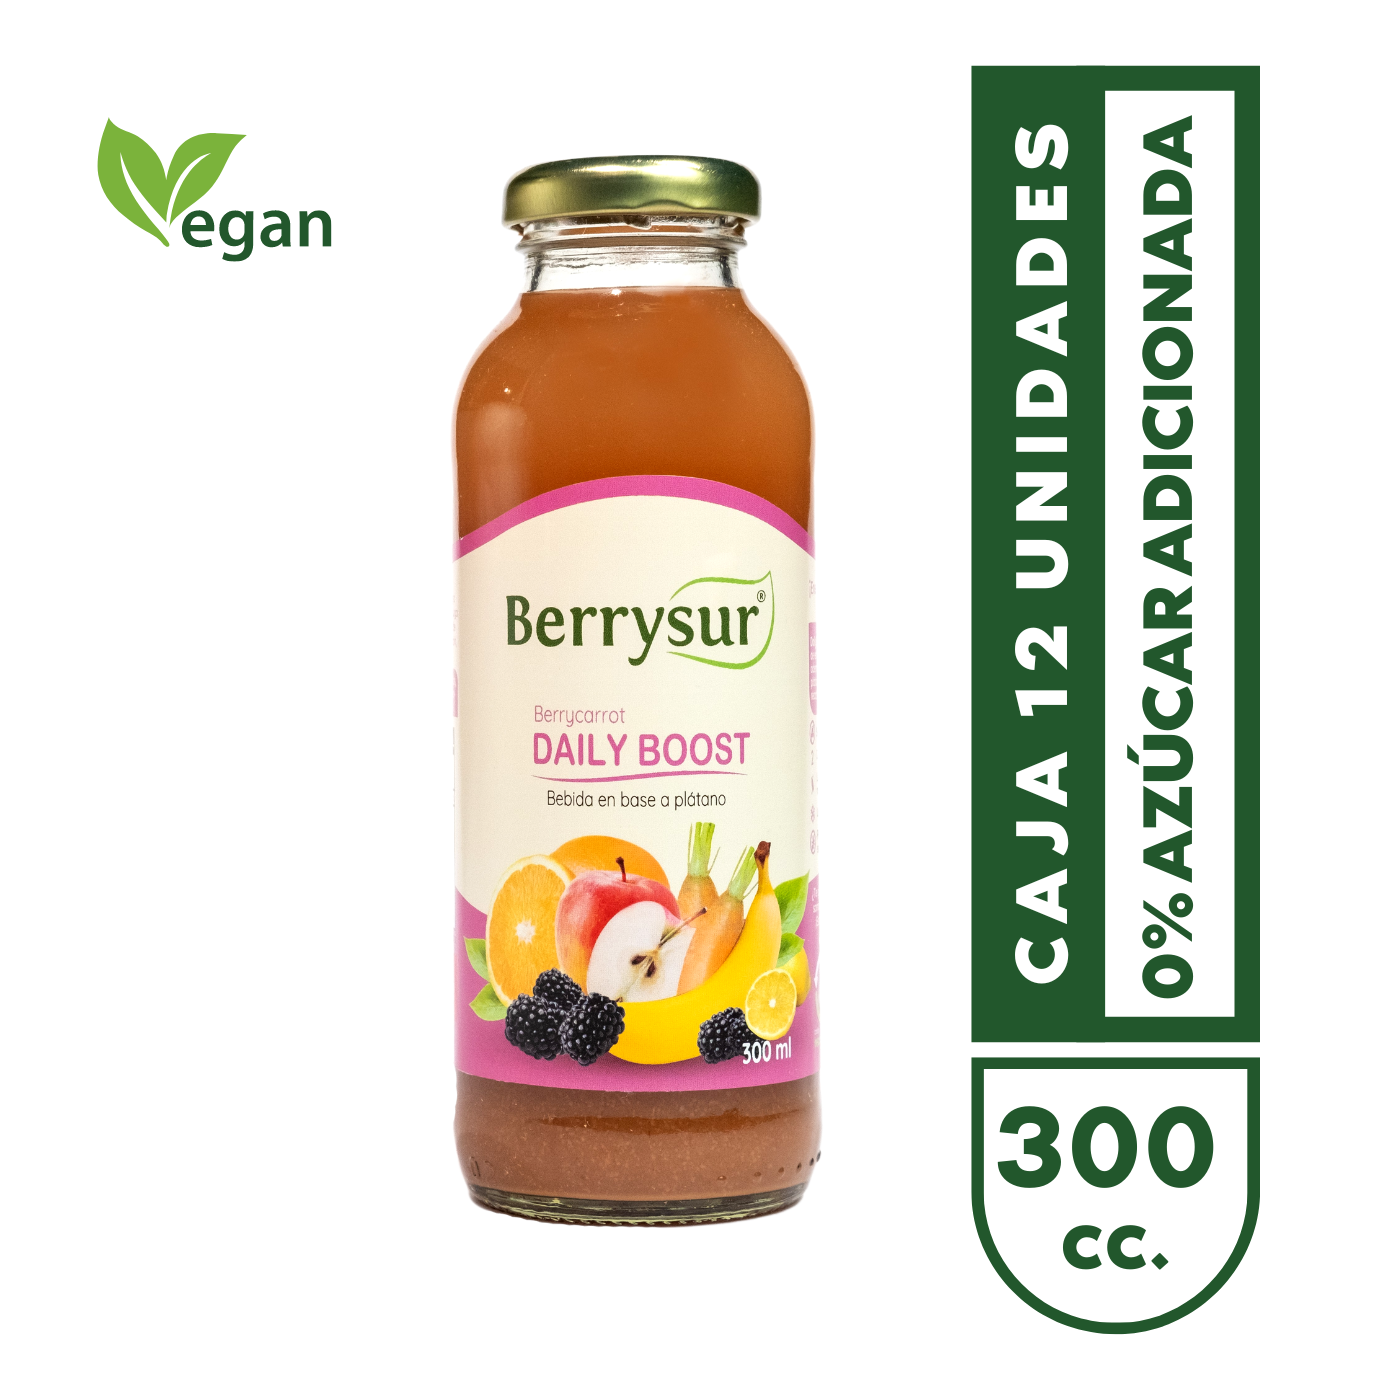 DailyBoost Berrycarrot 300 cc. - Pack 12 unidades